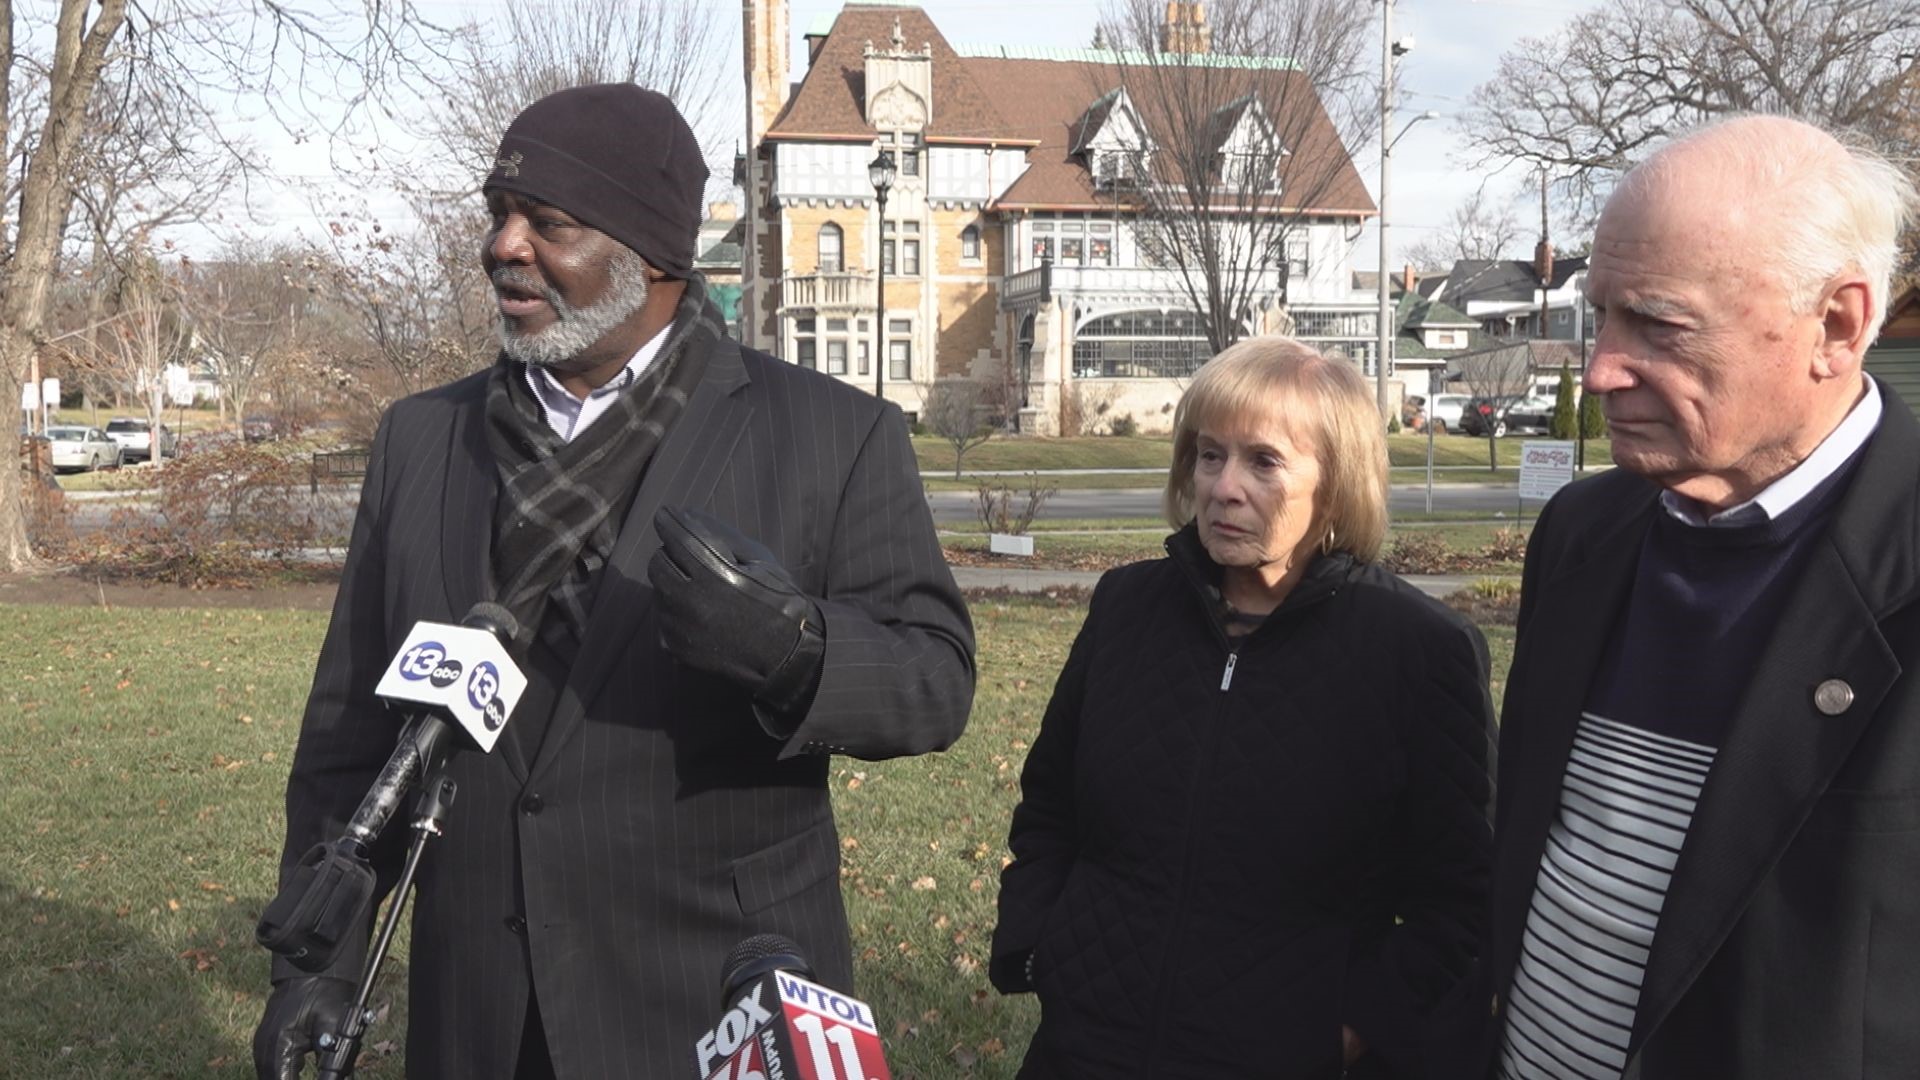 Mayors Mike Bell, Carty Finkbeiner, Donna Owens and Paula Hicks-Hudson are going to city council next Tuesday to propose their plan in time for the 2023 budget.